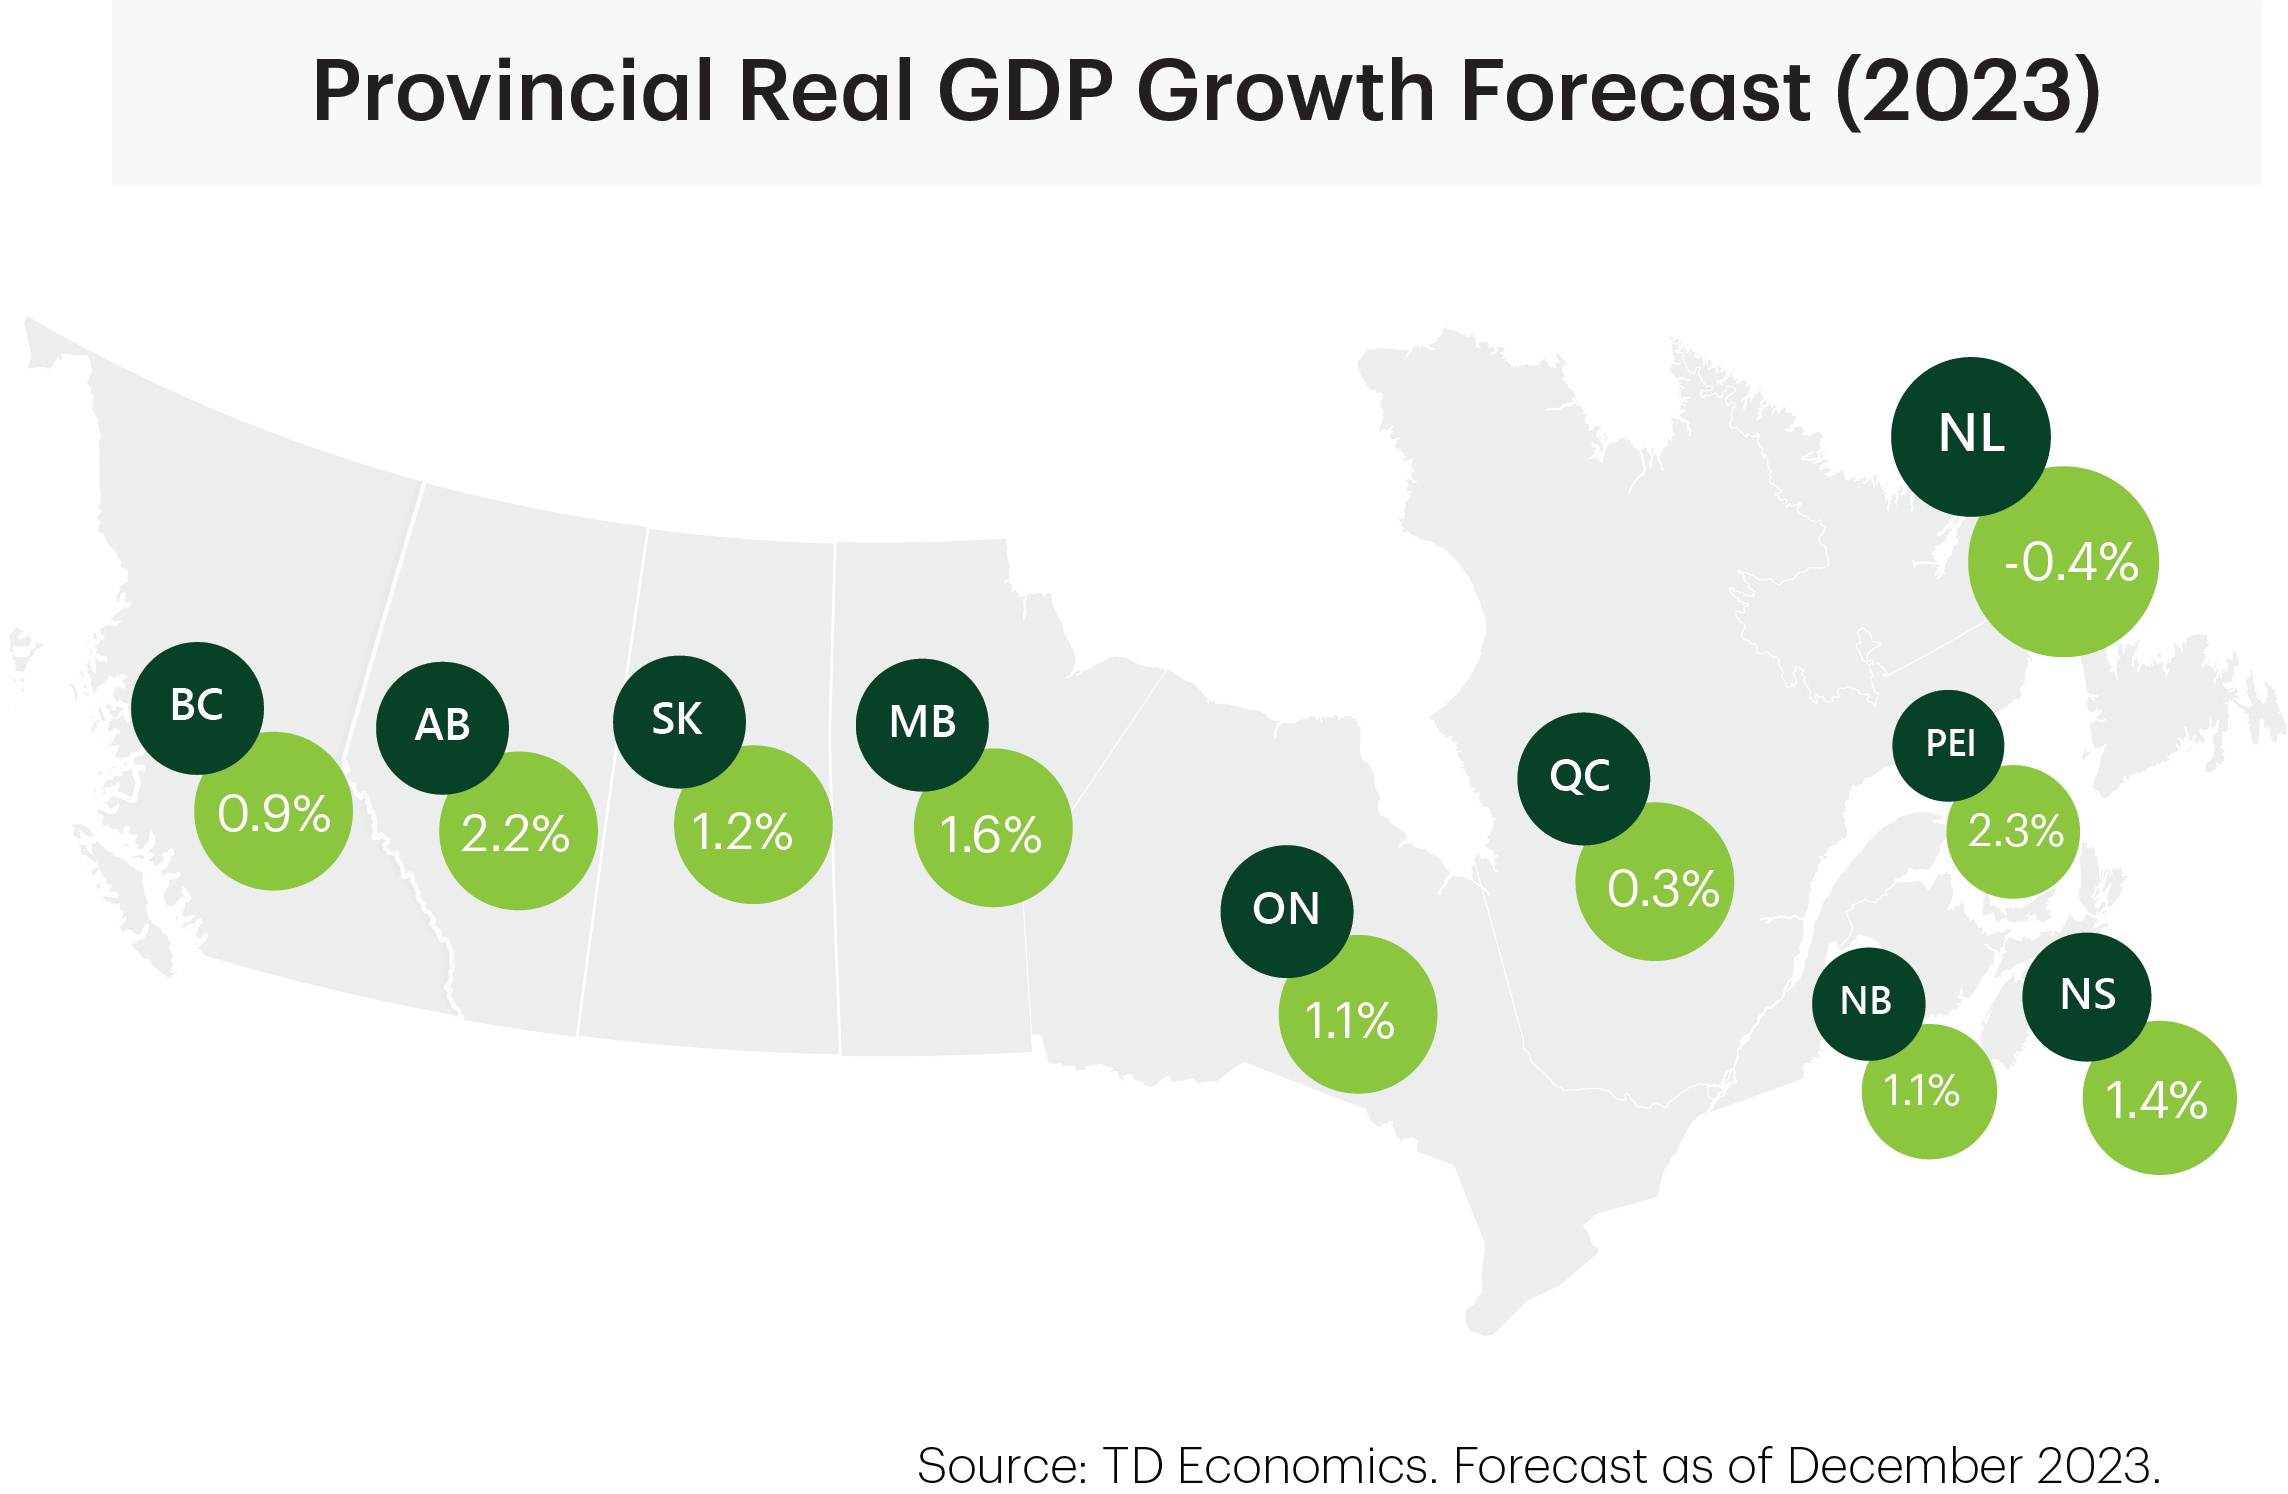 Provincial Real GDP Growth Forecast (2023)
        BC: 0.9%
        AB: 2.2%
        SK: 1.2%
        MB: 1.6%
        ON: 1.1%
        QC: 0.3%
        NB: 1.1%
        NS: 1.4%
        PEI: 2.3%
        NL: -0.4%
        